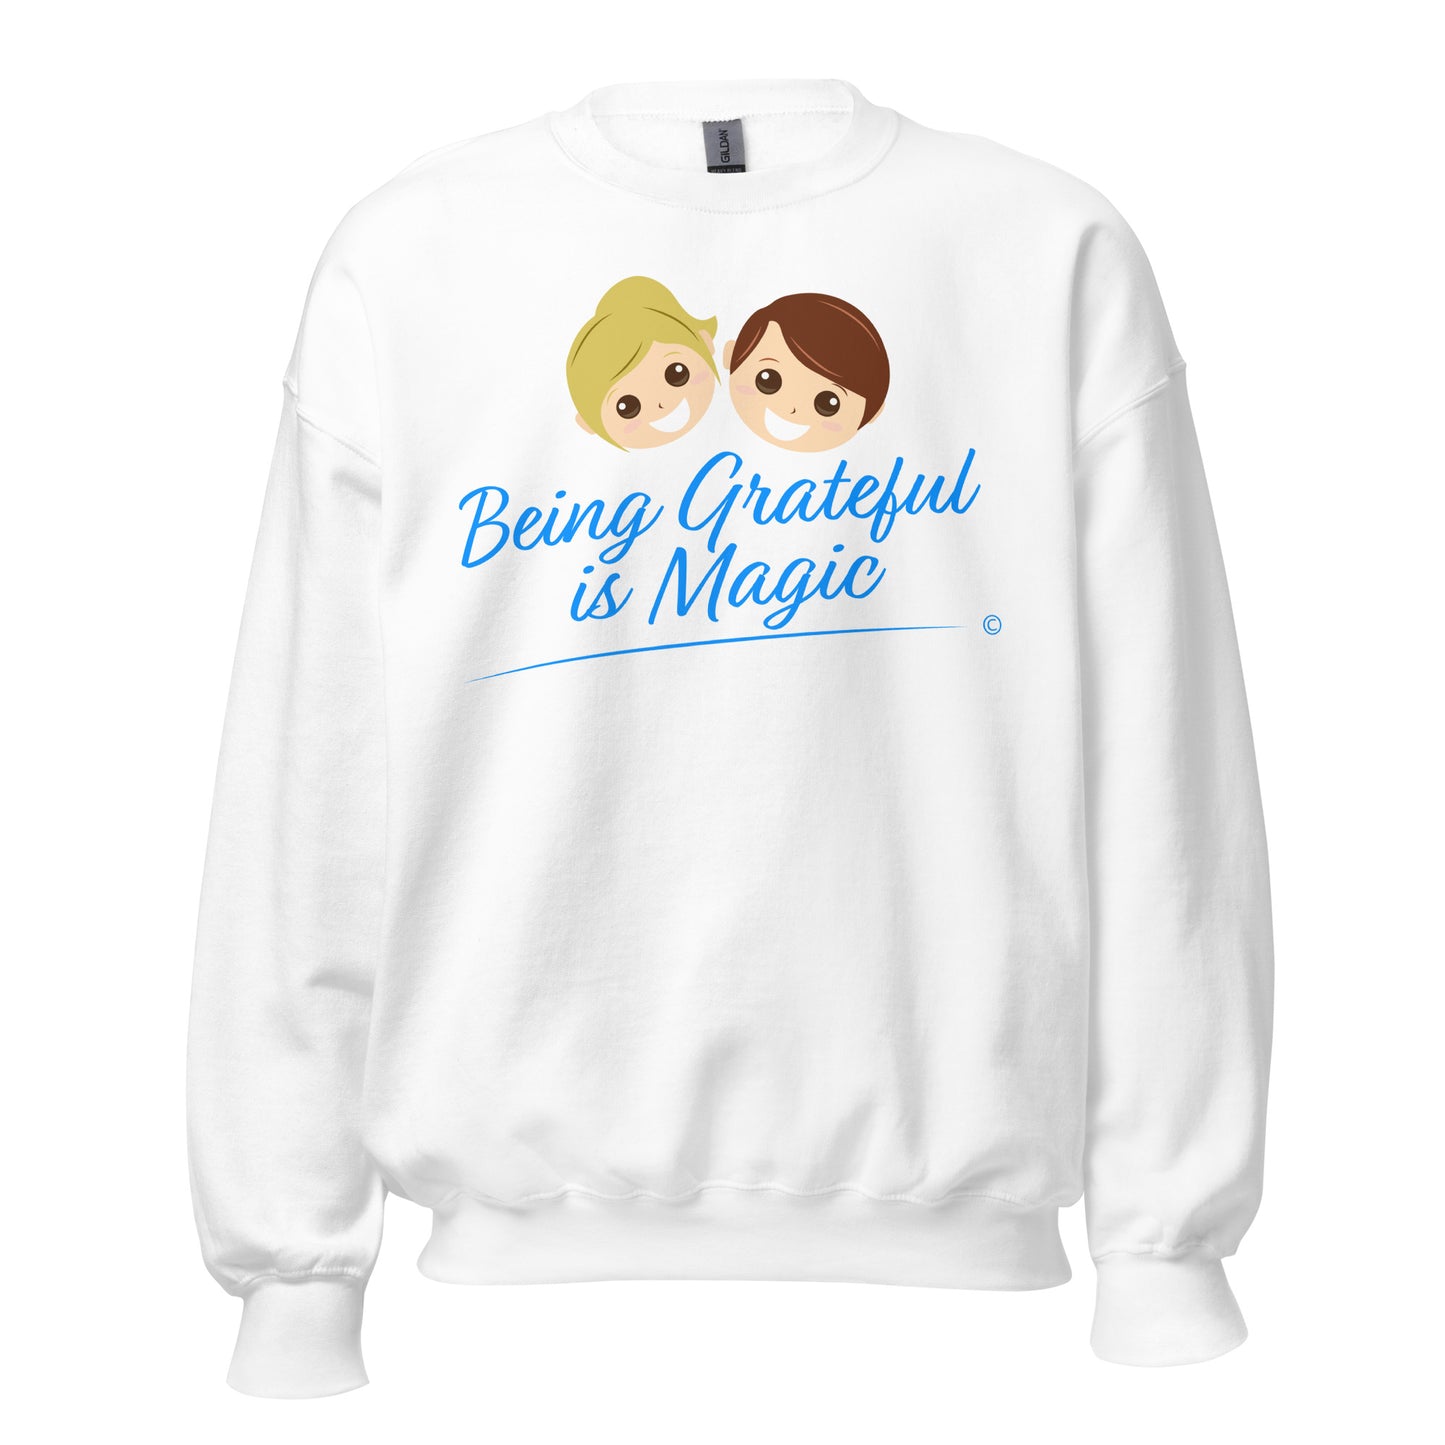 Unisex sweatshirts with color options- White